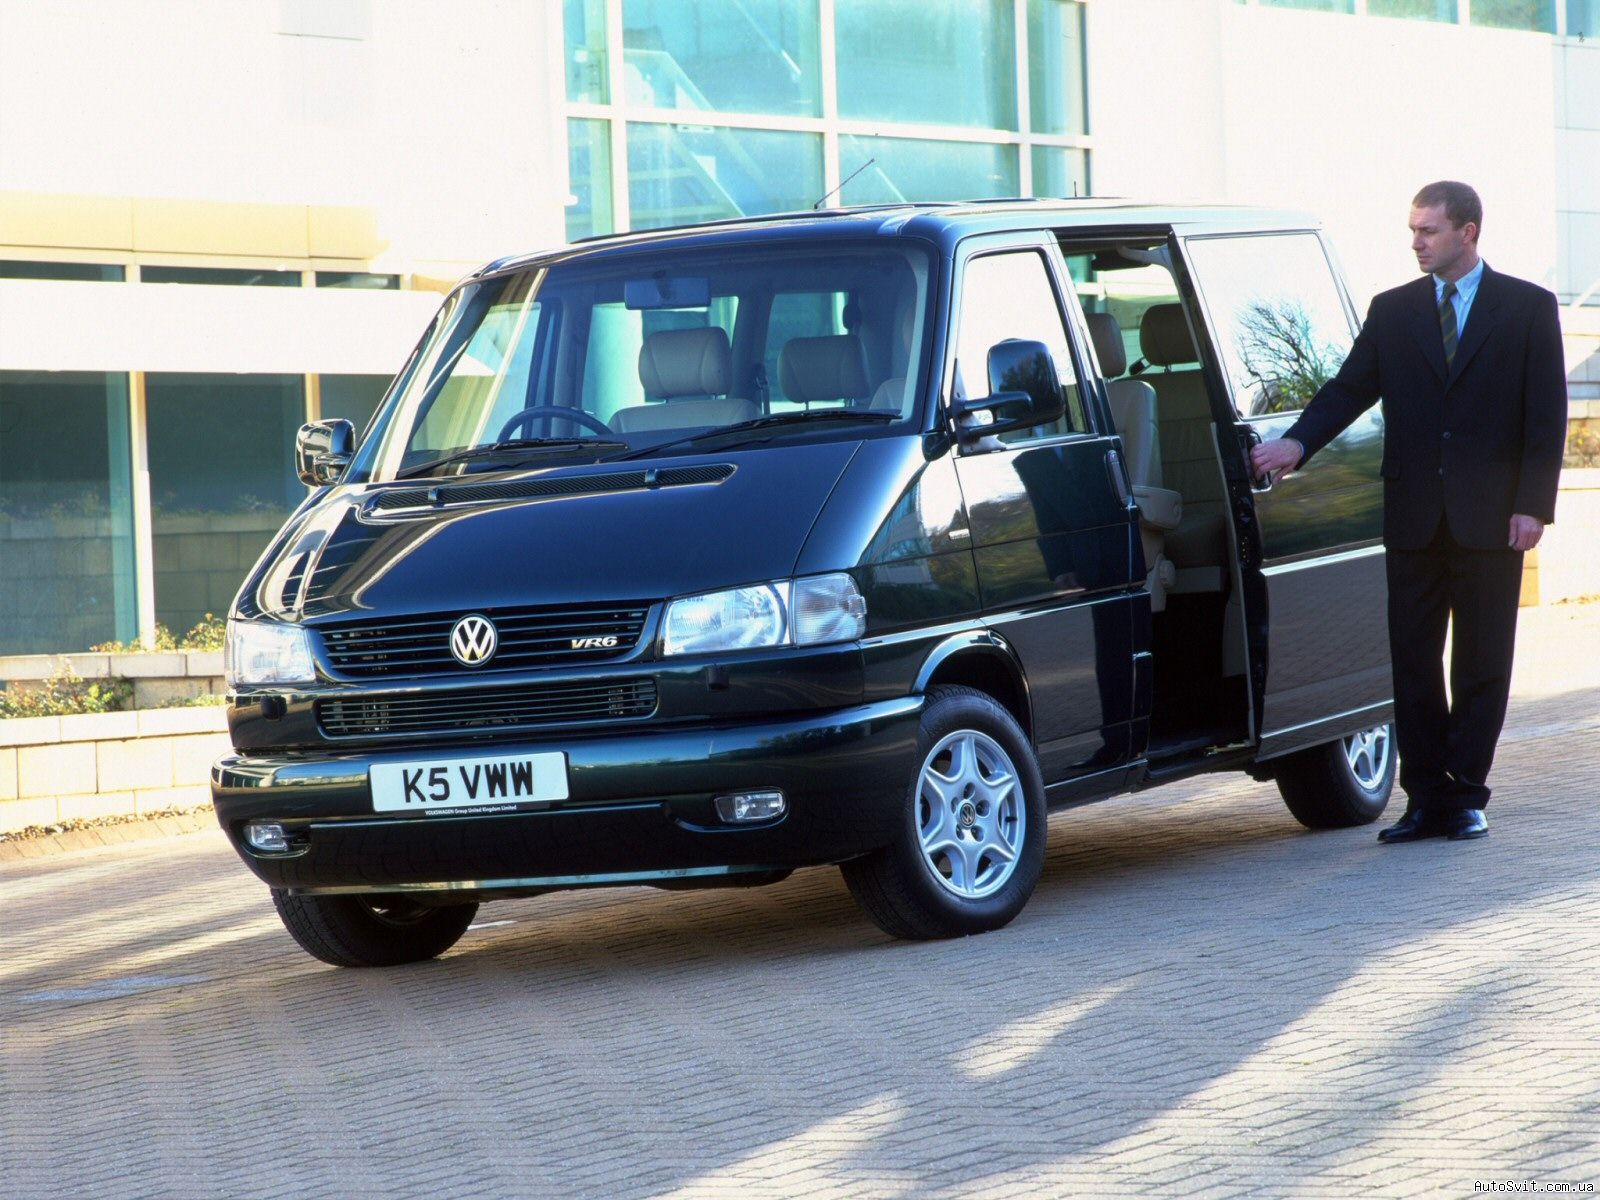 volkswagen t4 transporter related images,1 to 50 - Zuoda Images